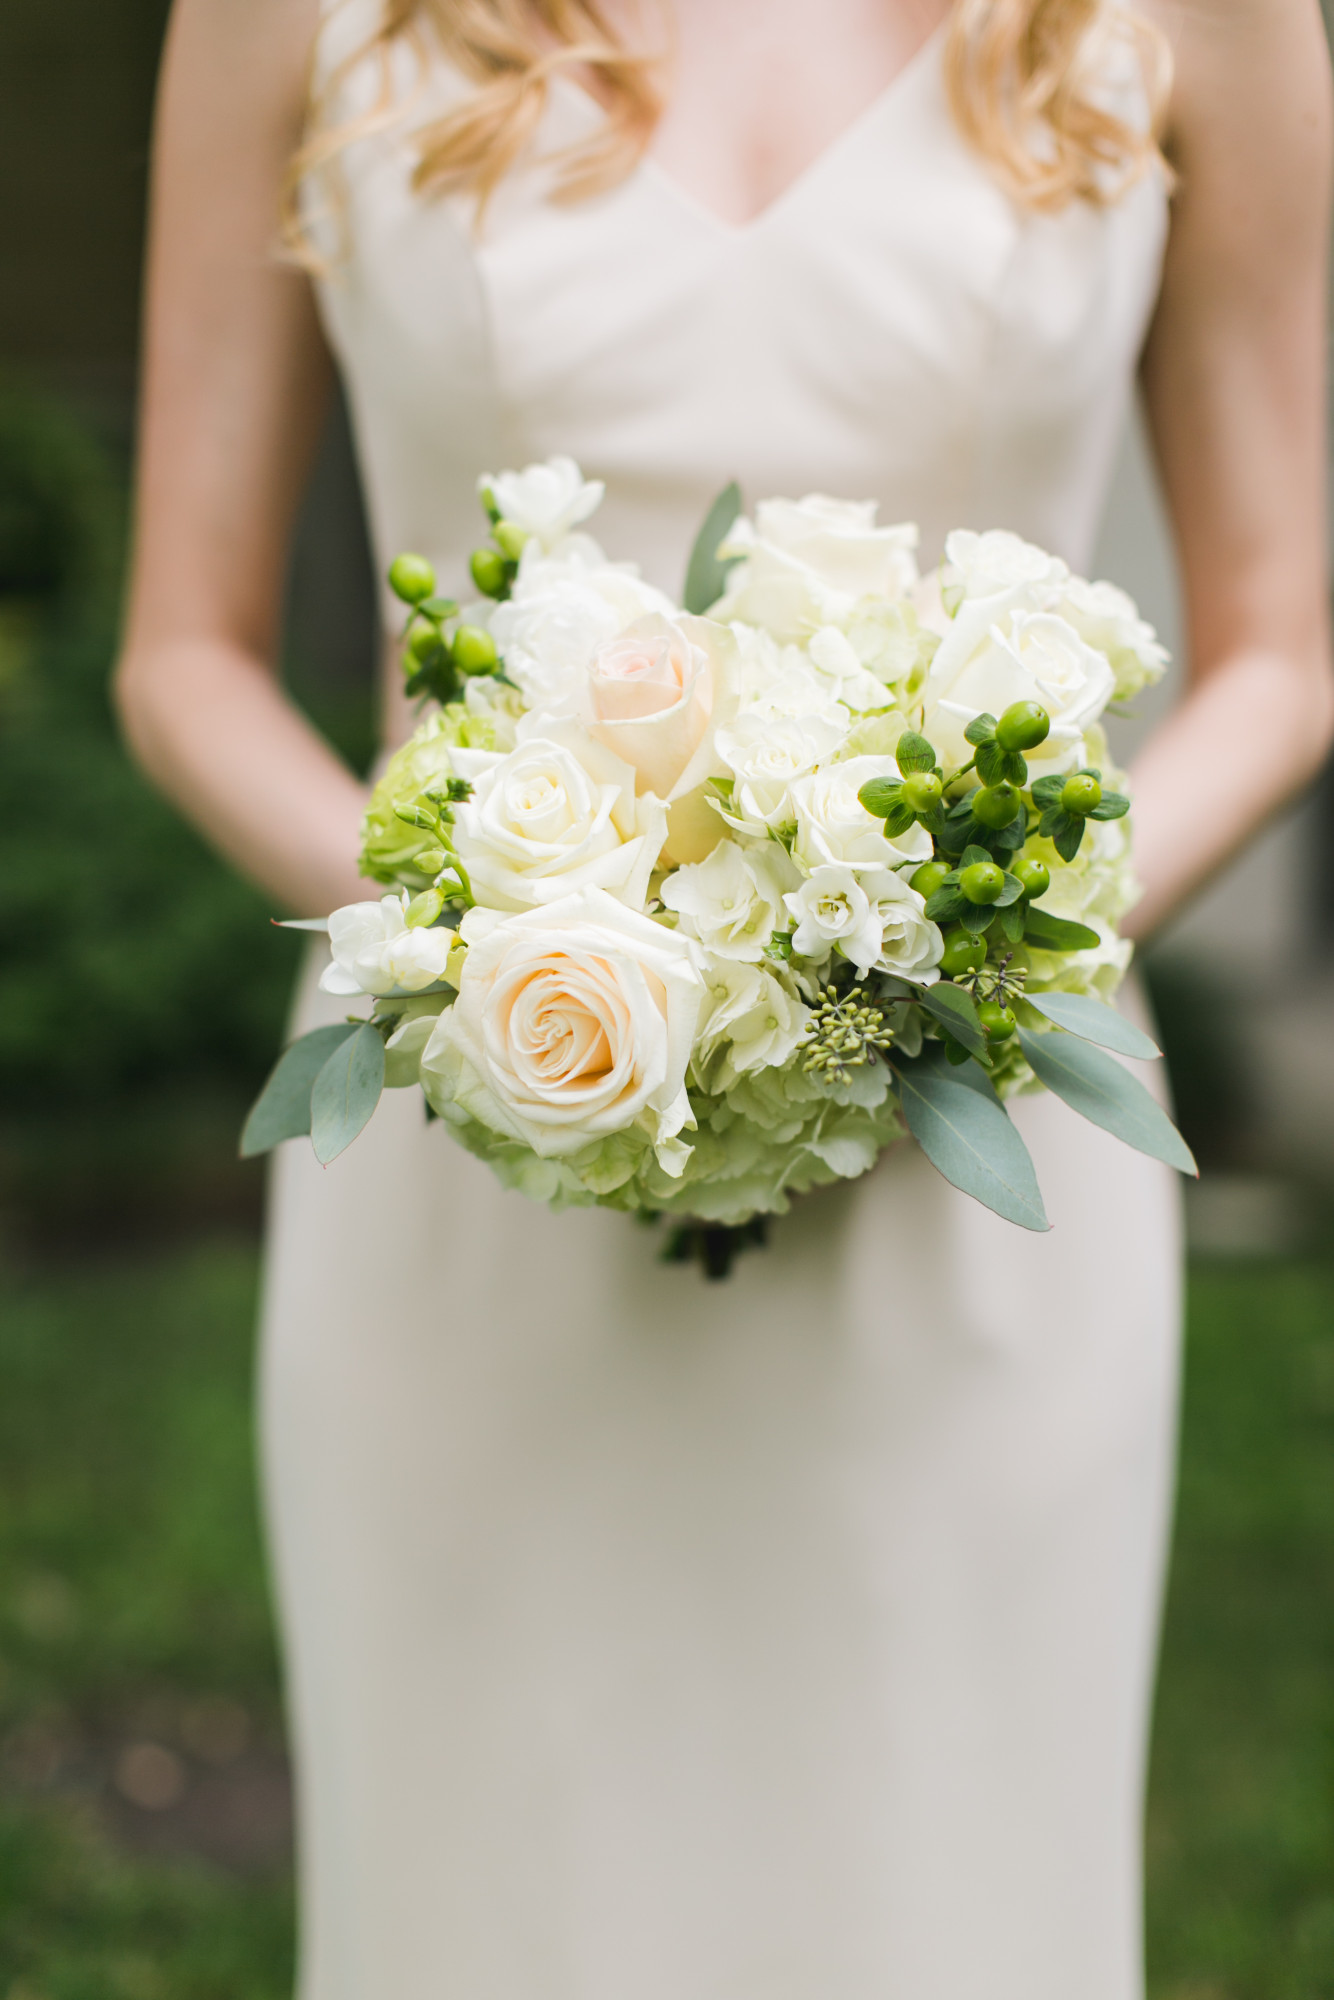 An Ivory + White Downtown Dallas Wedding - The Overwhelmed Bride Wedding Blog